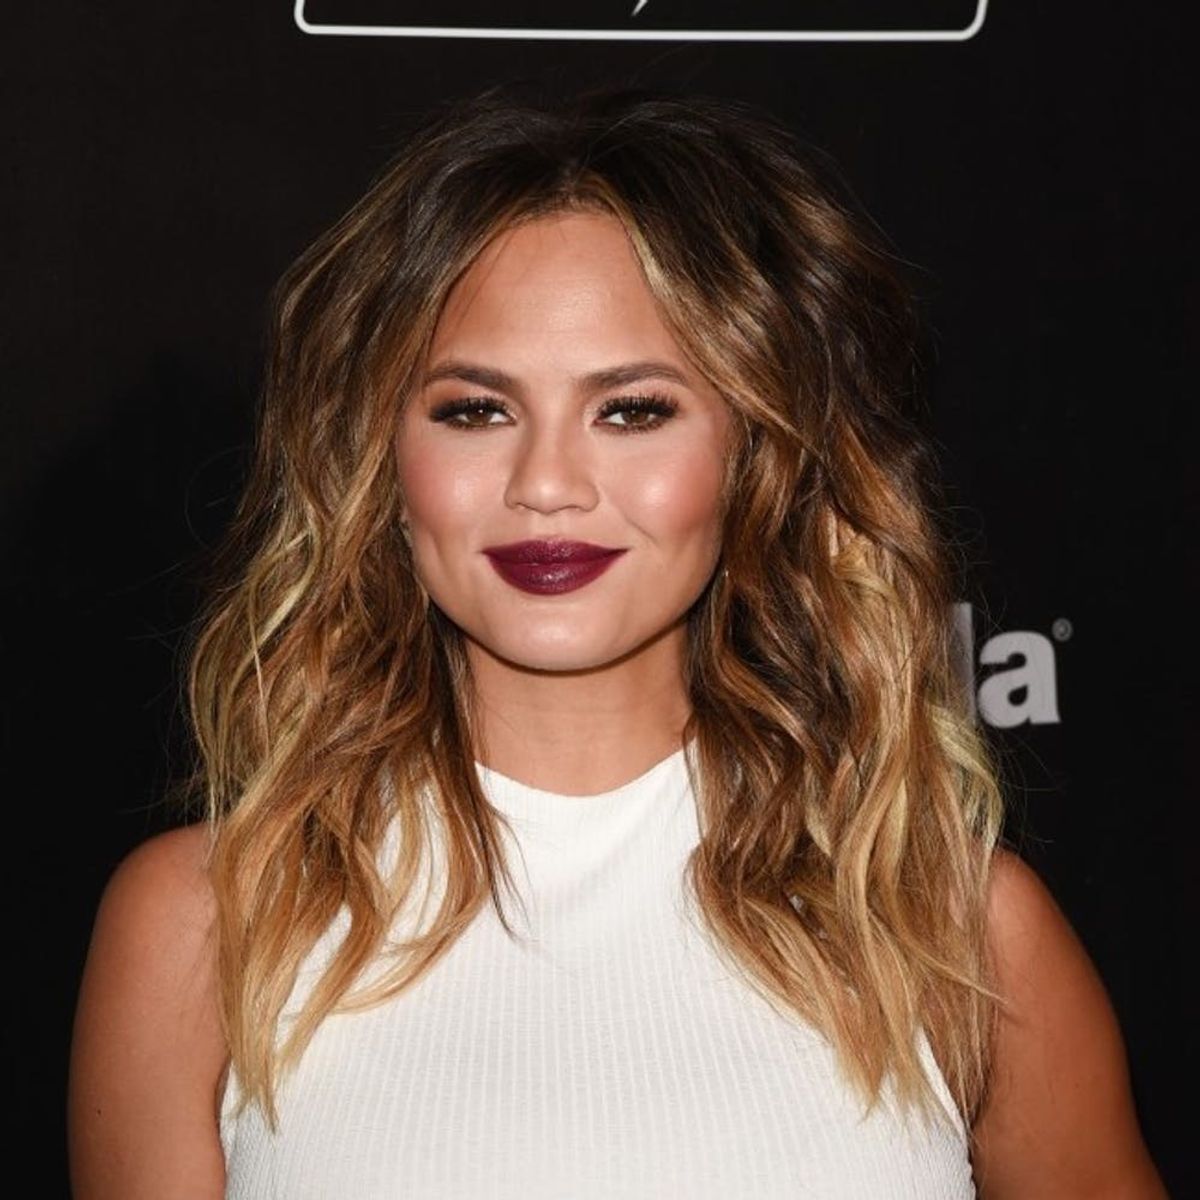 Wine Lips = THE Lipstick Trend You Have to Try This Season